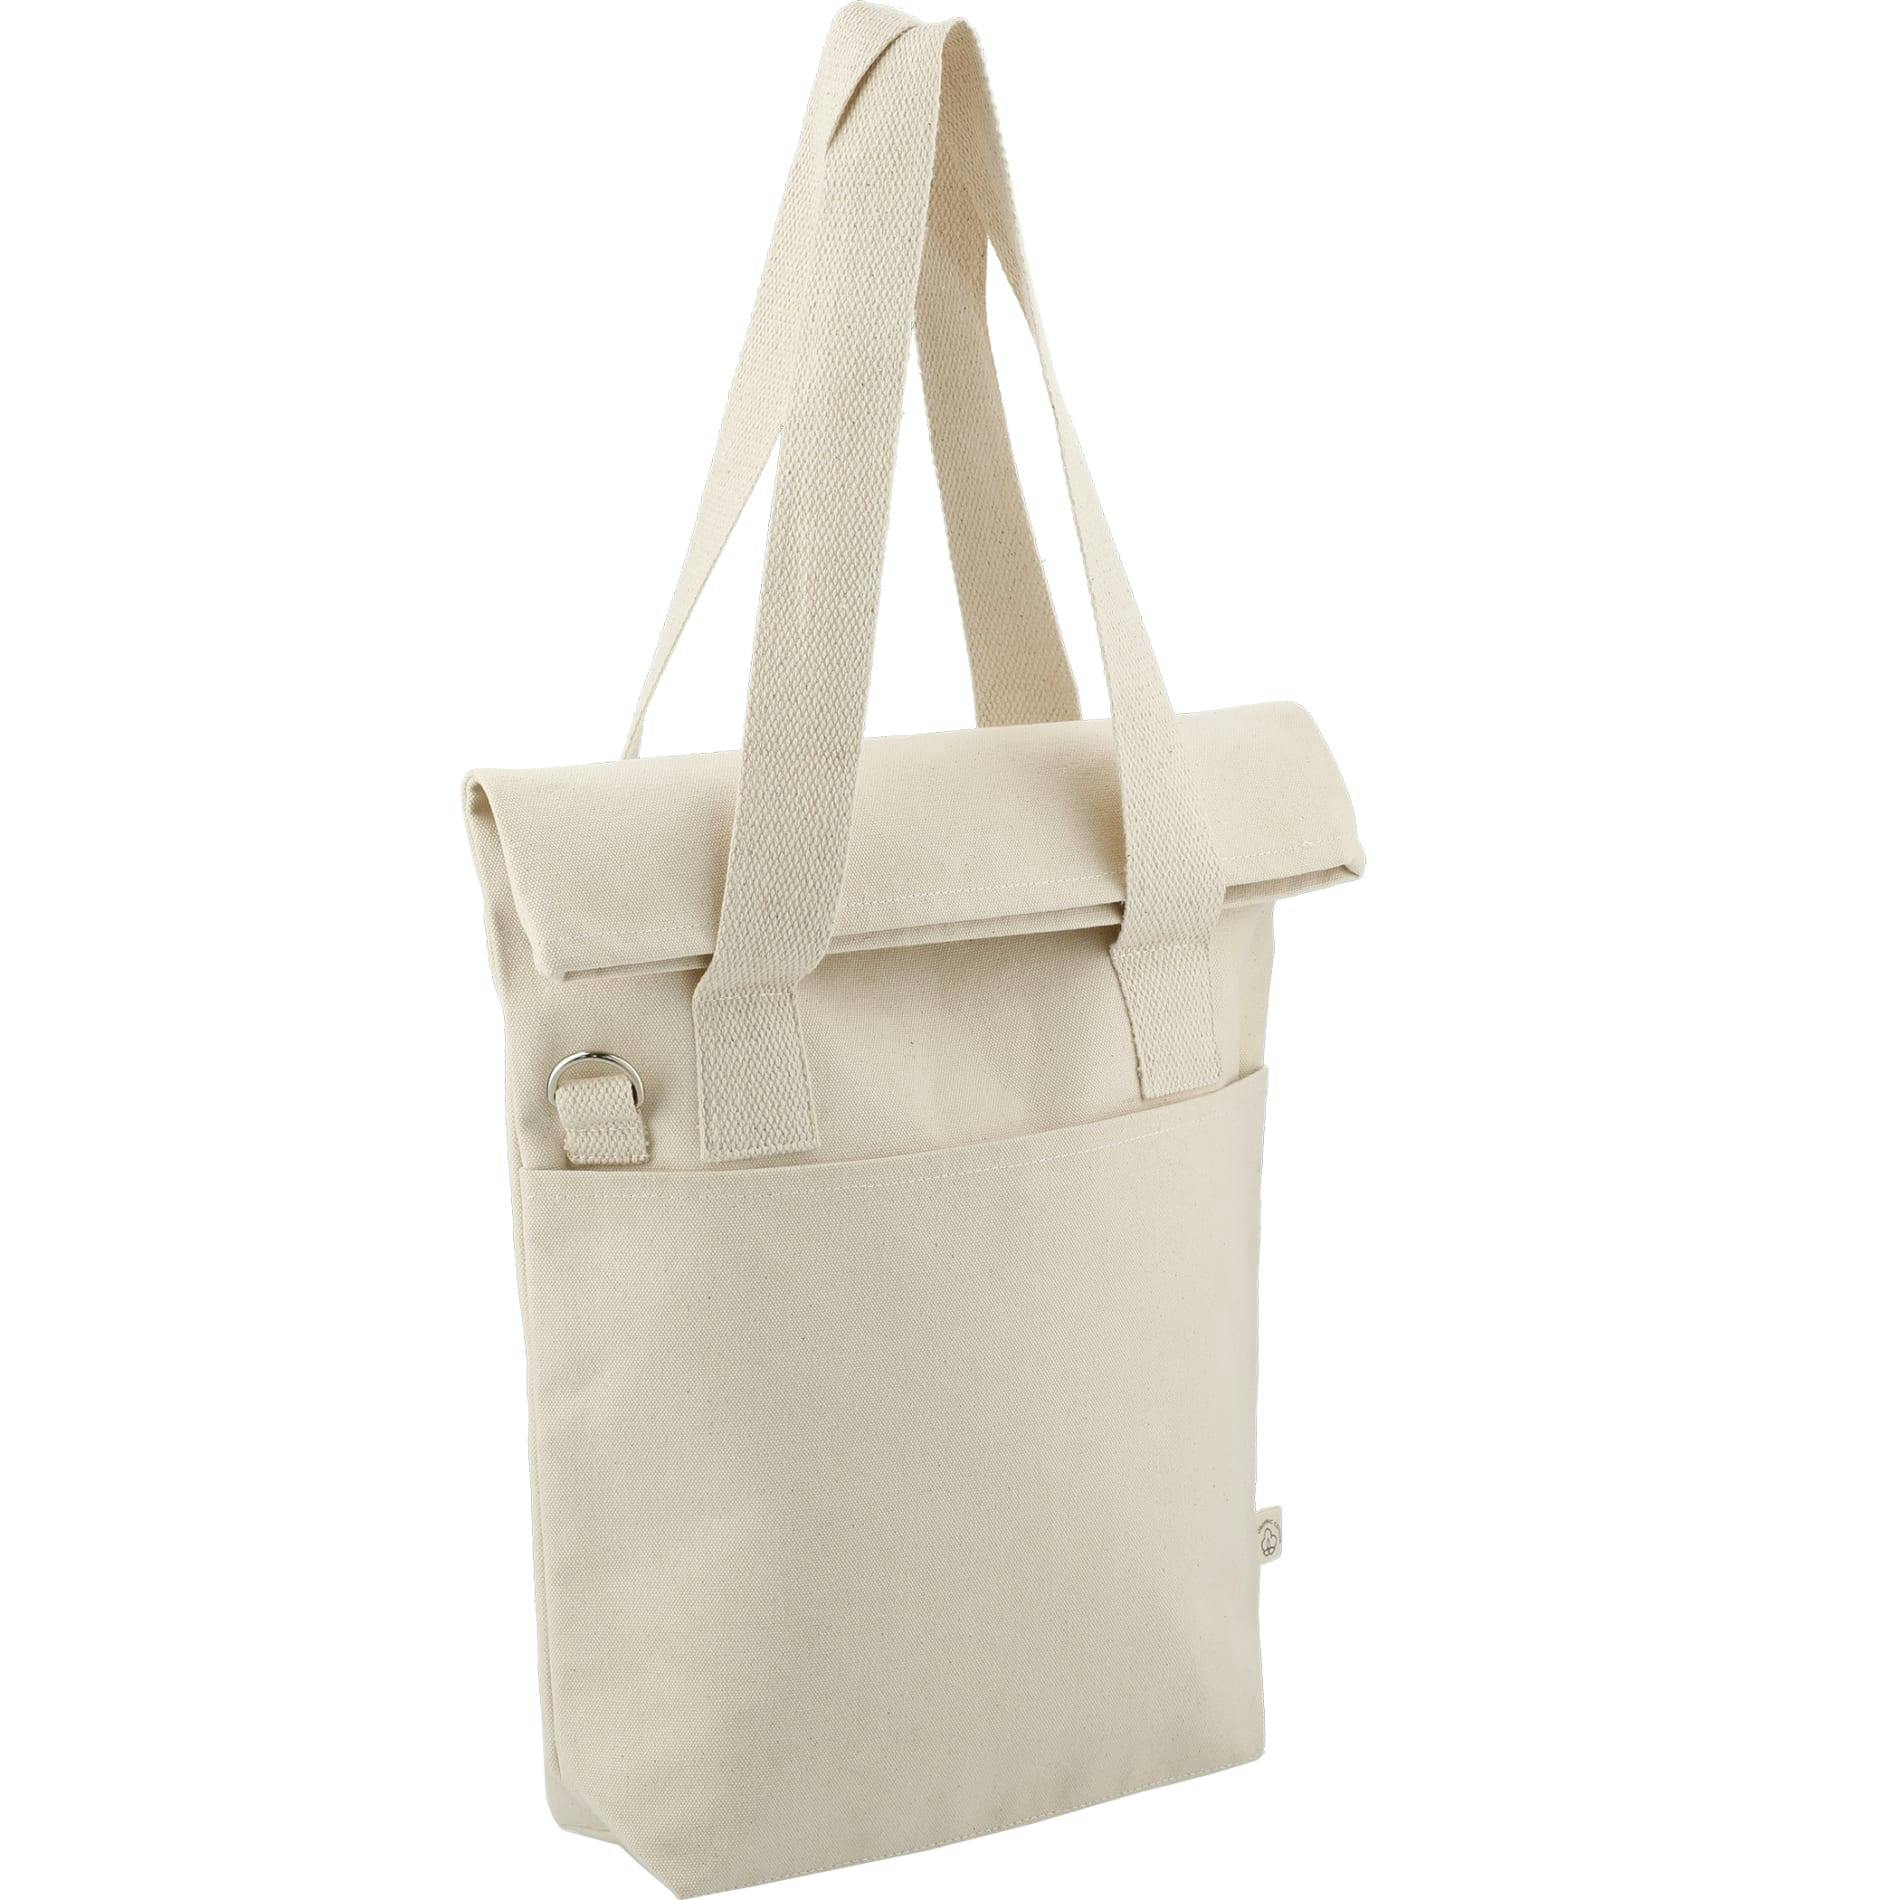 Organic Cotton Commuter Tote - additional Image 1